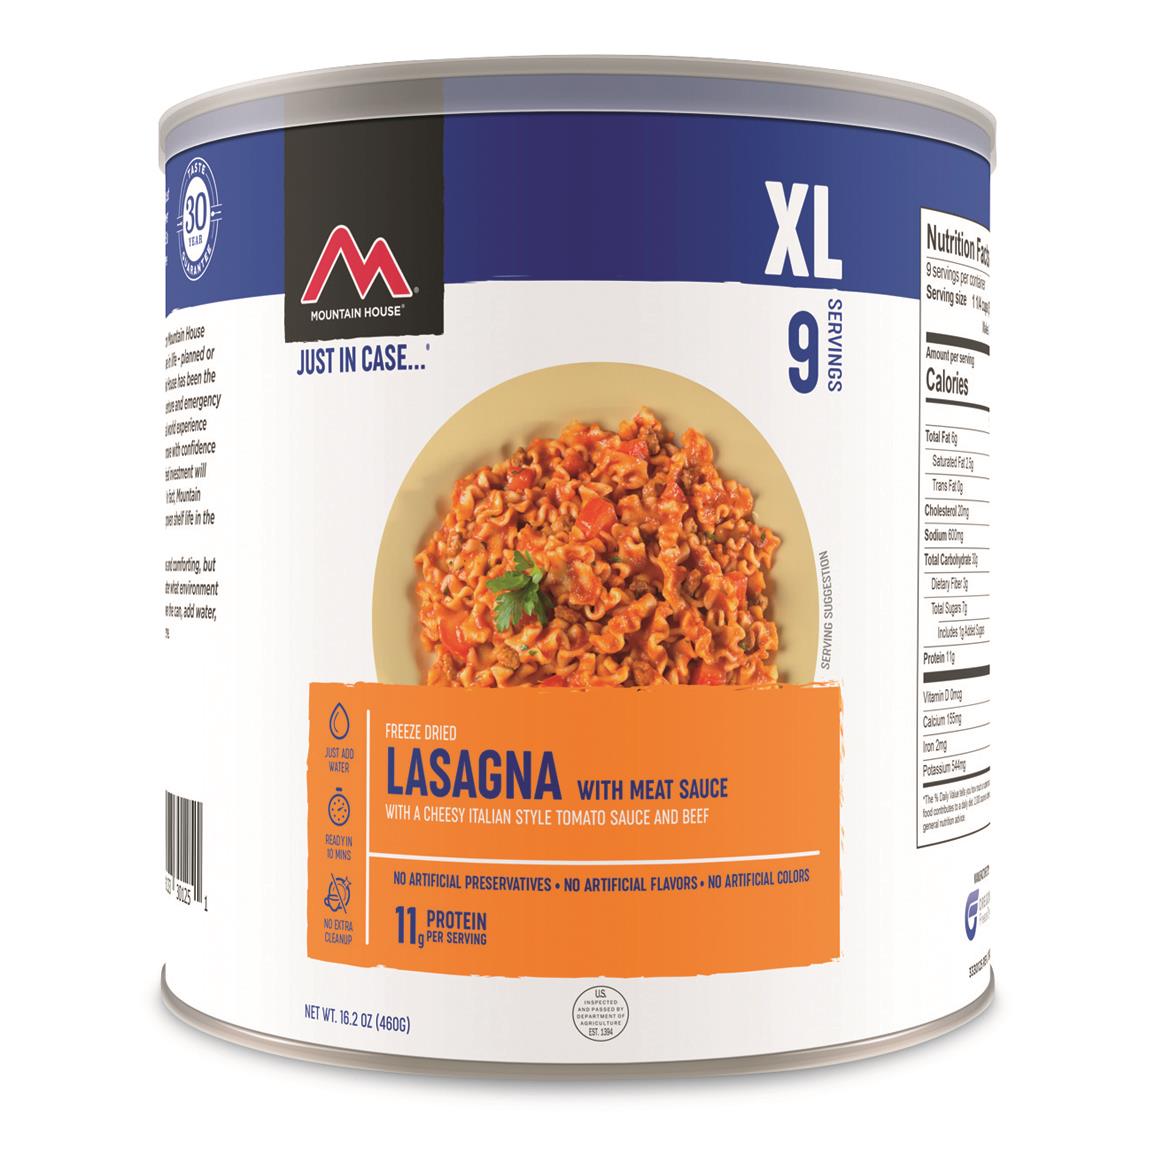 Mountain House Emergency Food Freeze-Dried Lasagna with Meat Sauce, 9 Servings